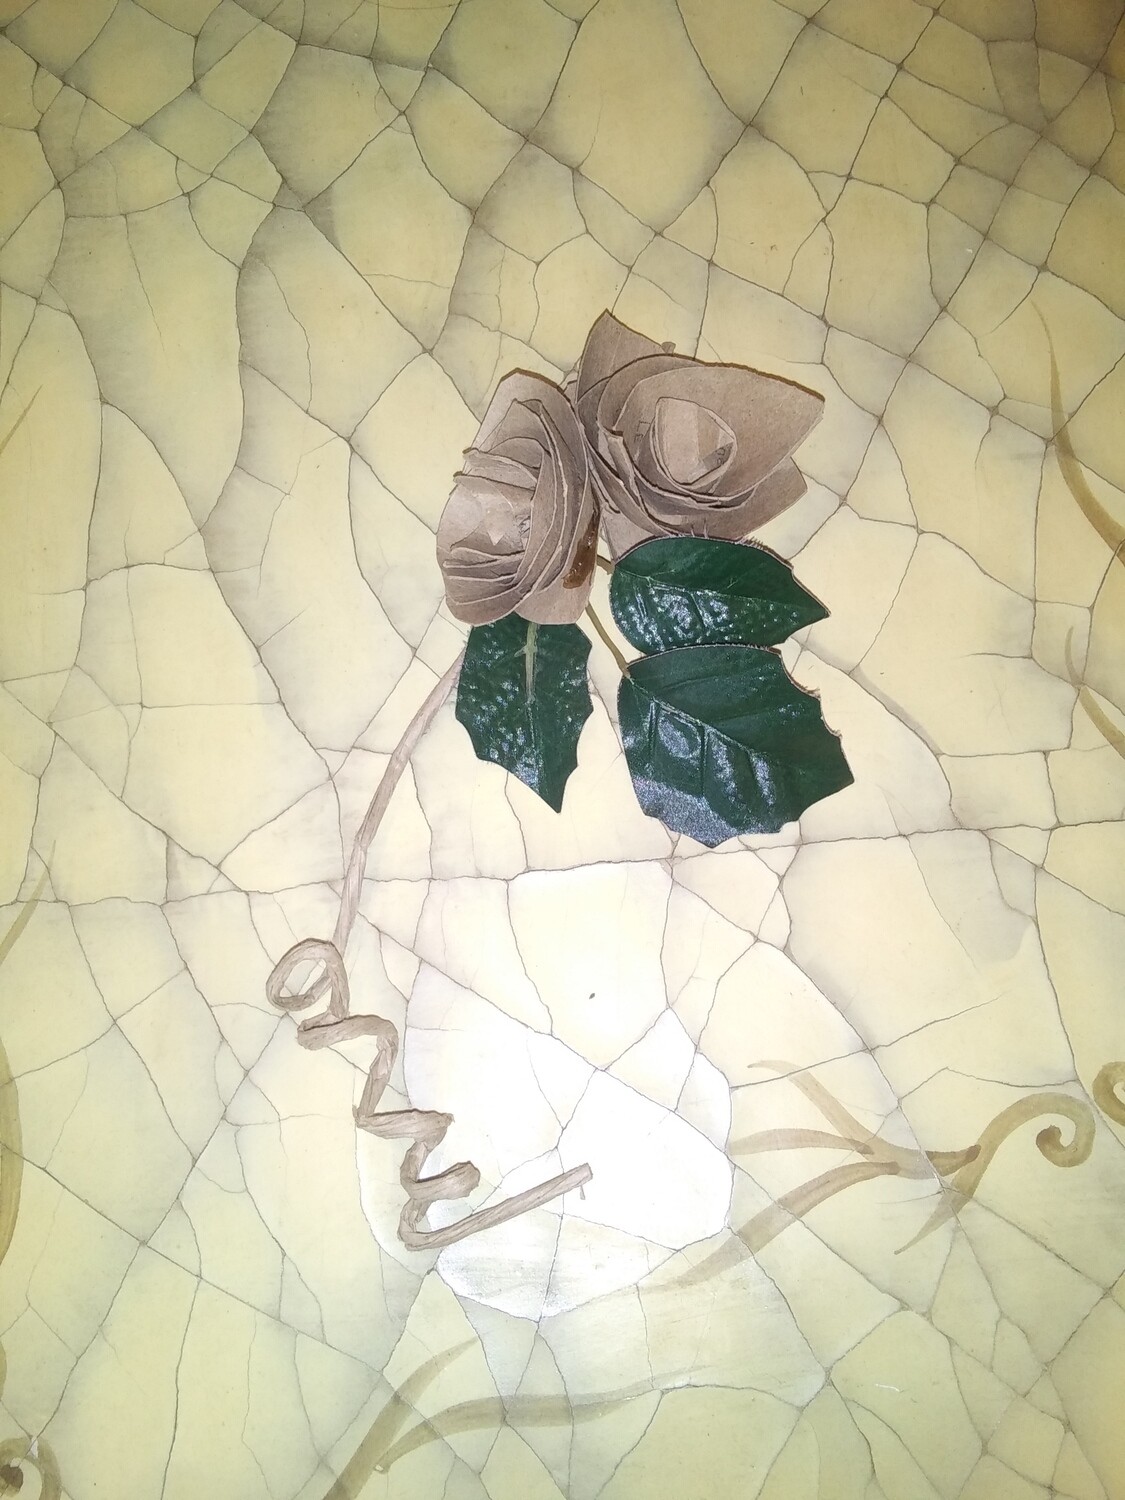 Replica - 6 - LEAF STEMMED "Paper Roses" ARTwork Creations-Made from Upcycled (Recycled) Paper(s) - (Roses displayed with Wooden Accent Designs are Sold Separately)